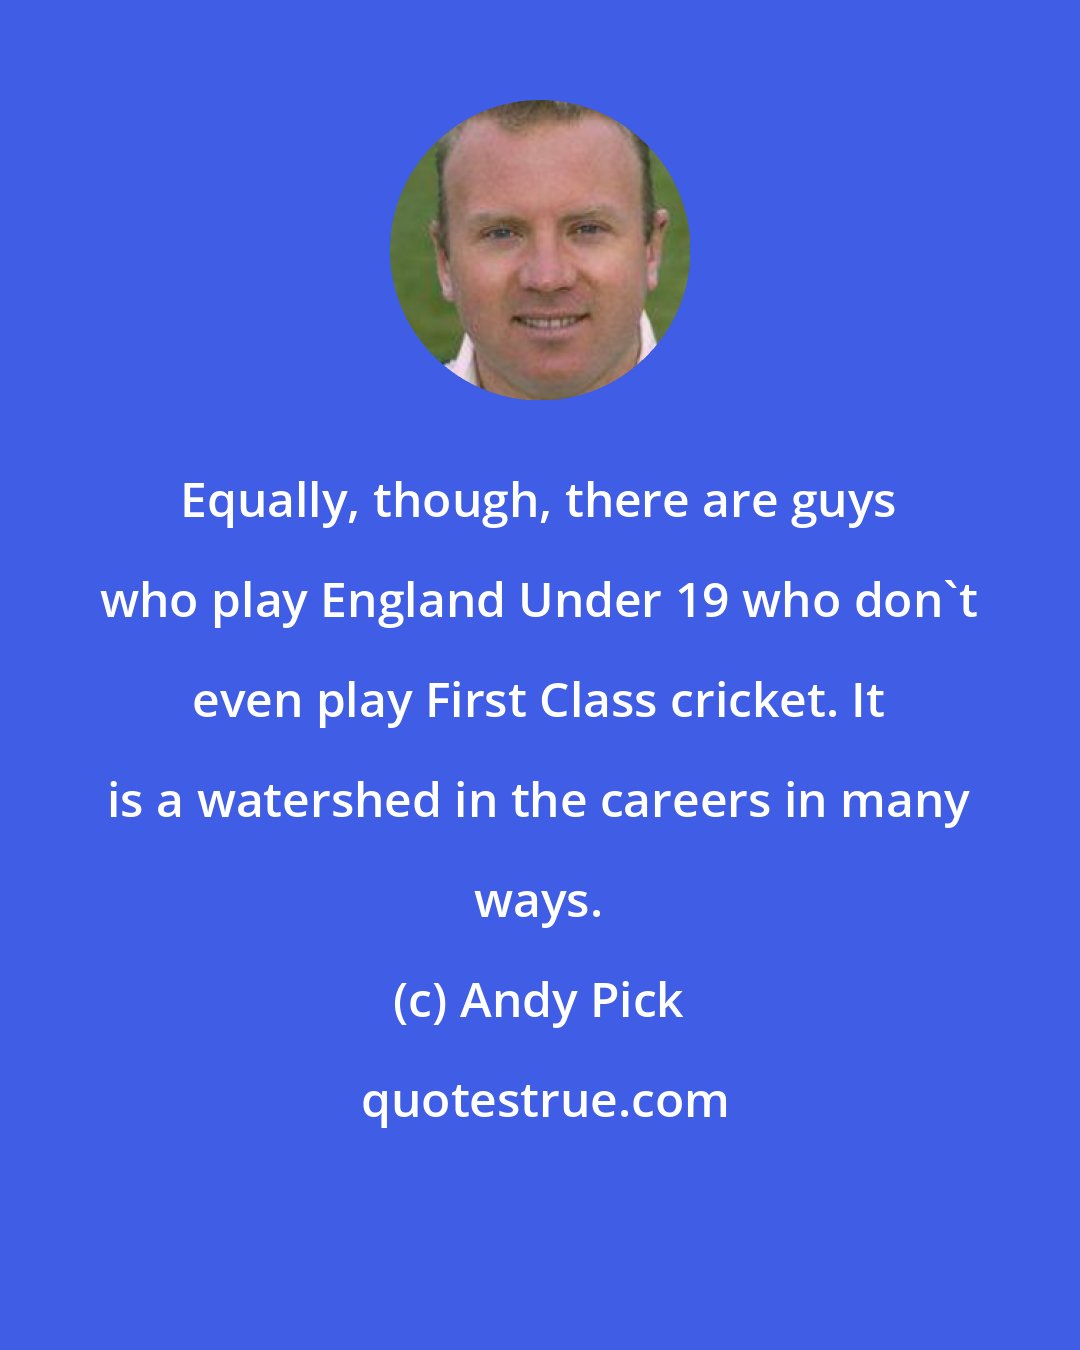 Andy Pick: Equally, though, there are guys who play England Under 19 who don't even play First Class cricket. It is a watershed in the careers in many ways.